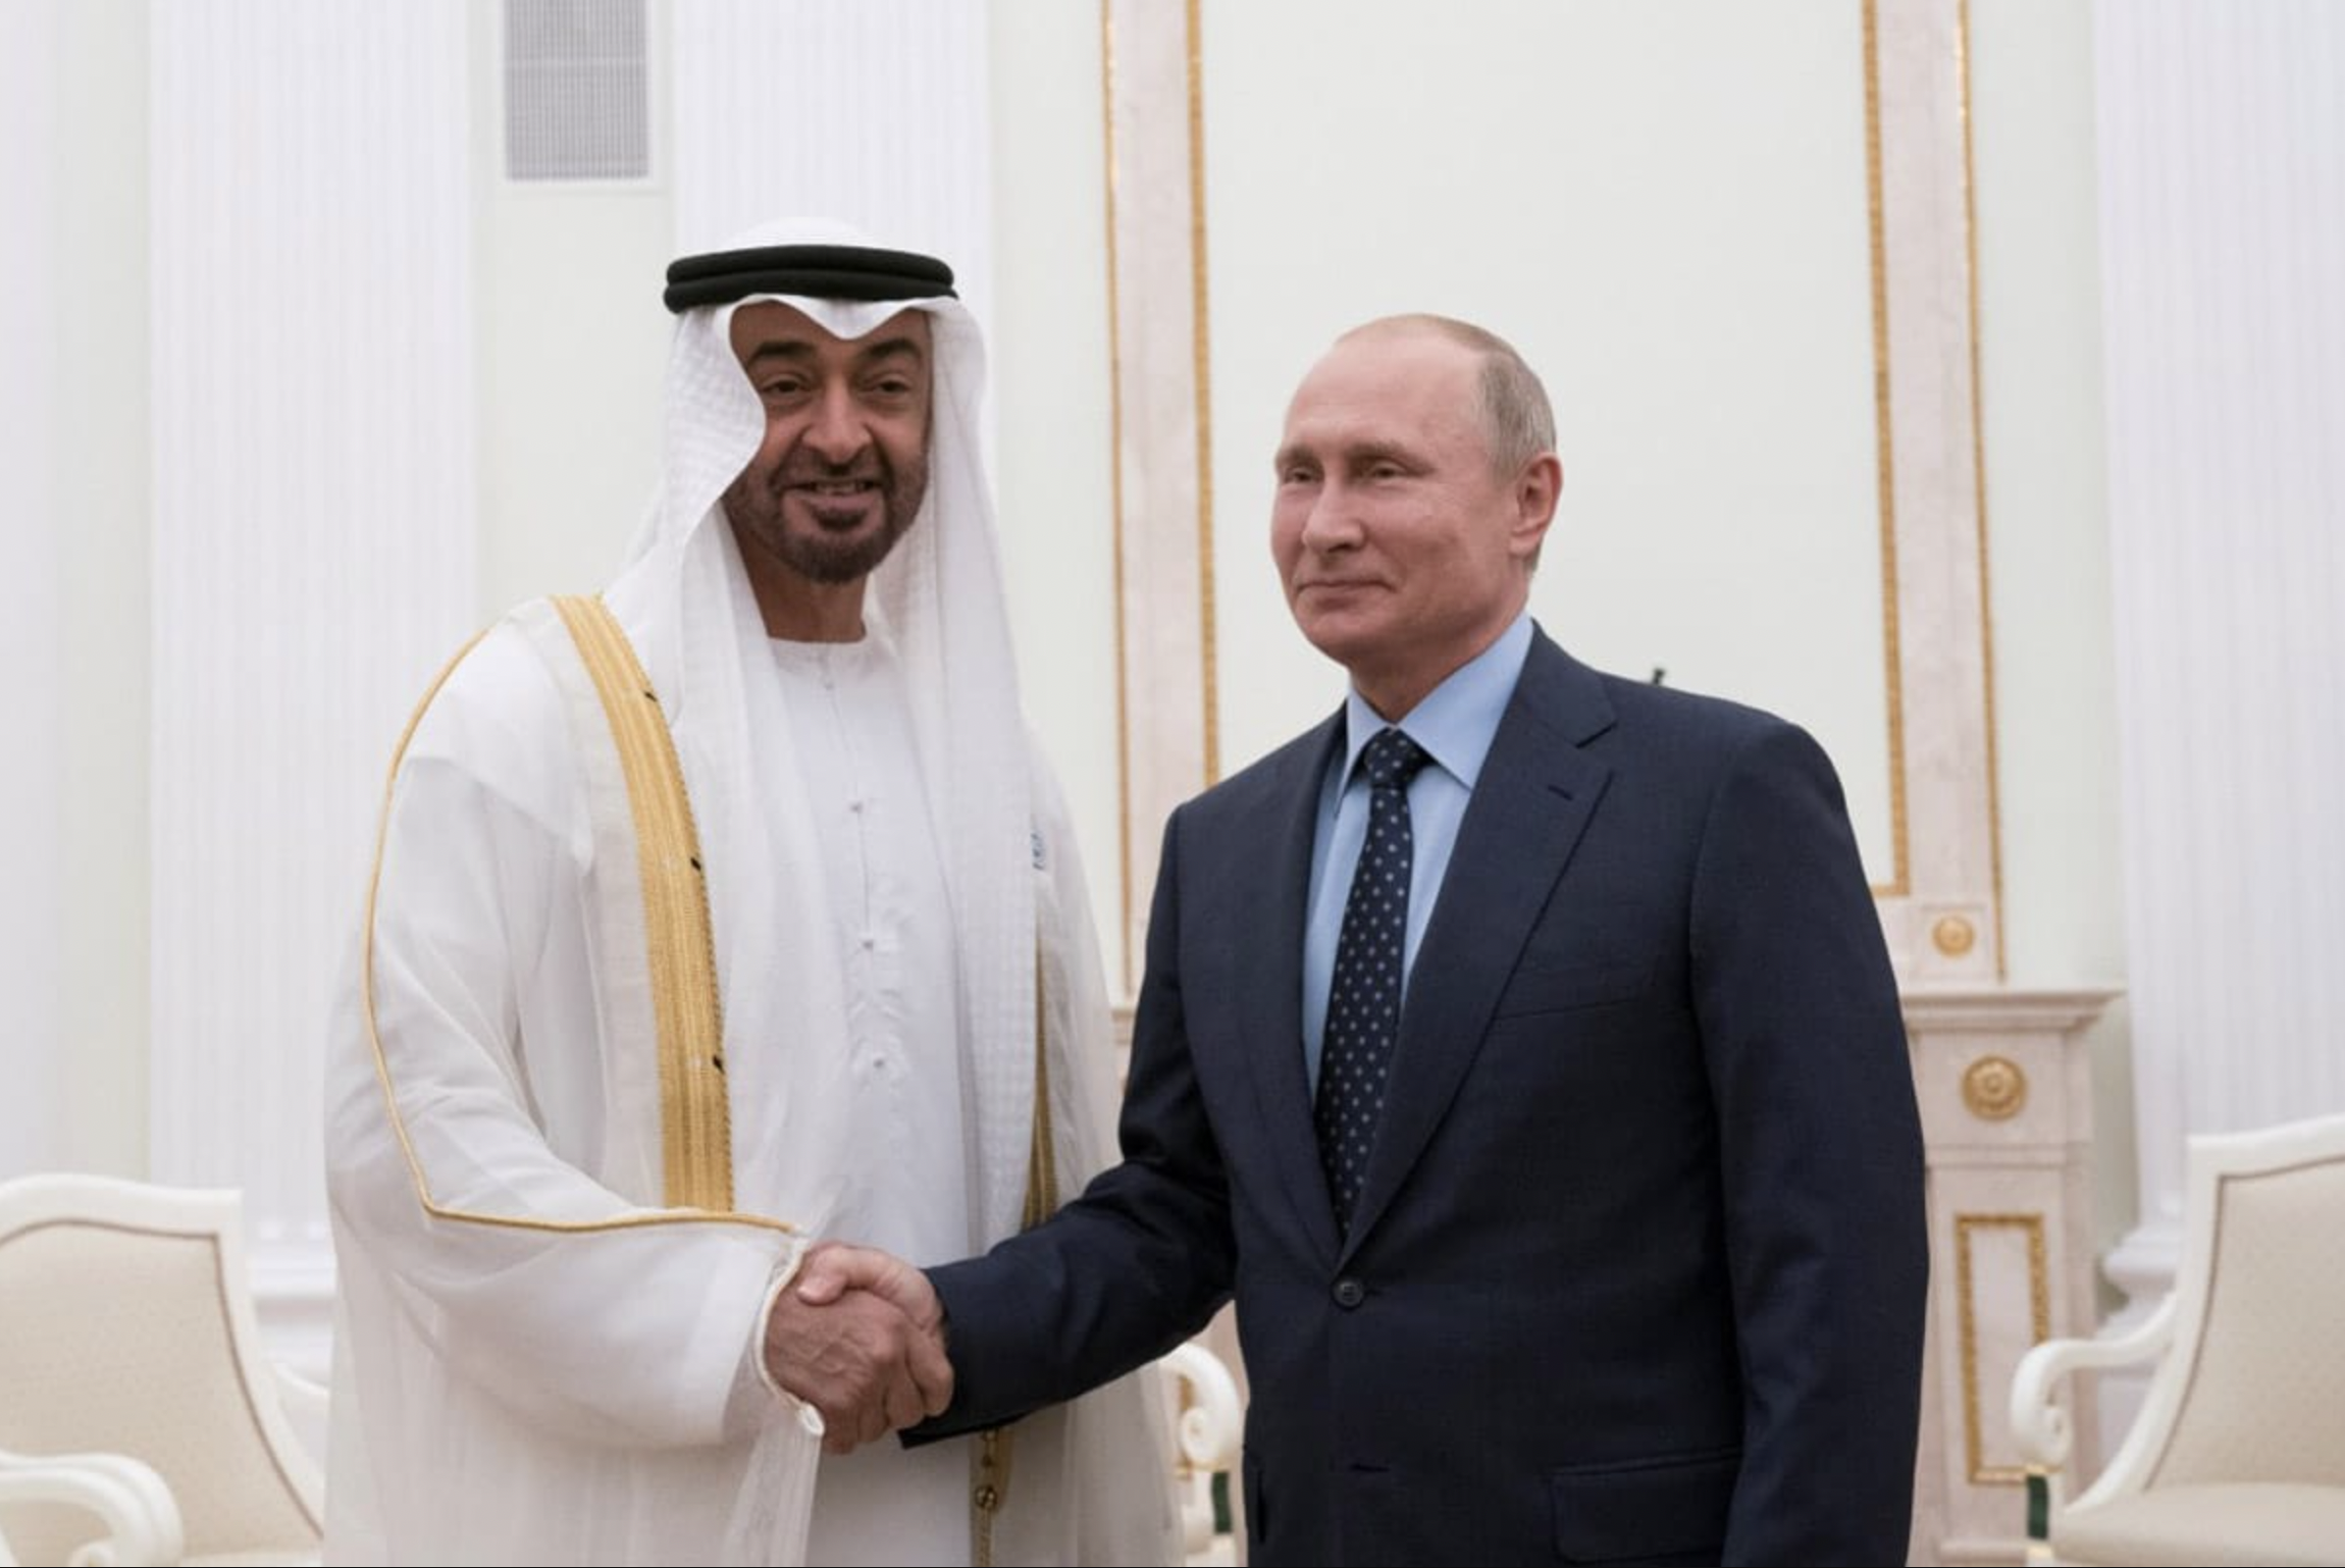 The UAE’s President Sheikh Mohamed bin Zayed meeting Russia’s President Vladimir Putin to discuss bilateral ties in a visit to Russia (AFP)